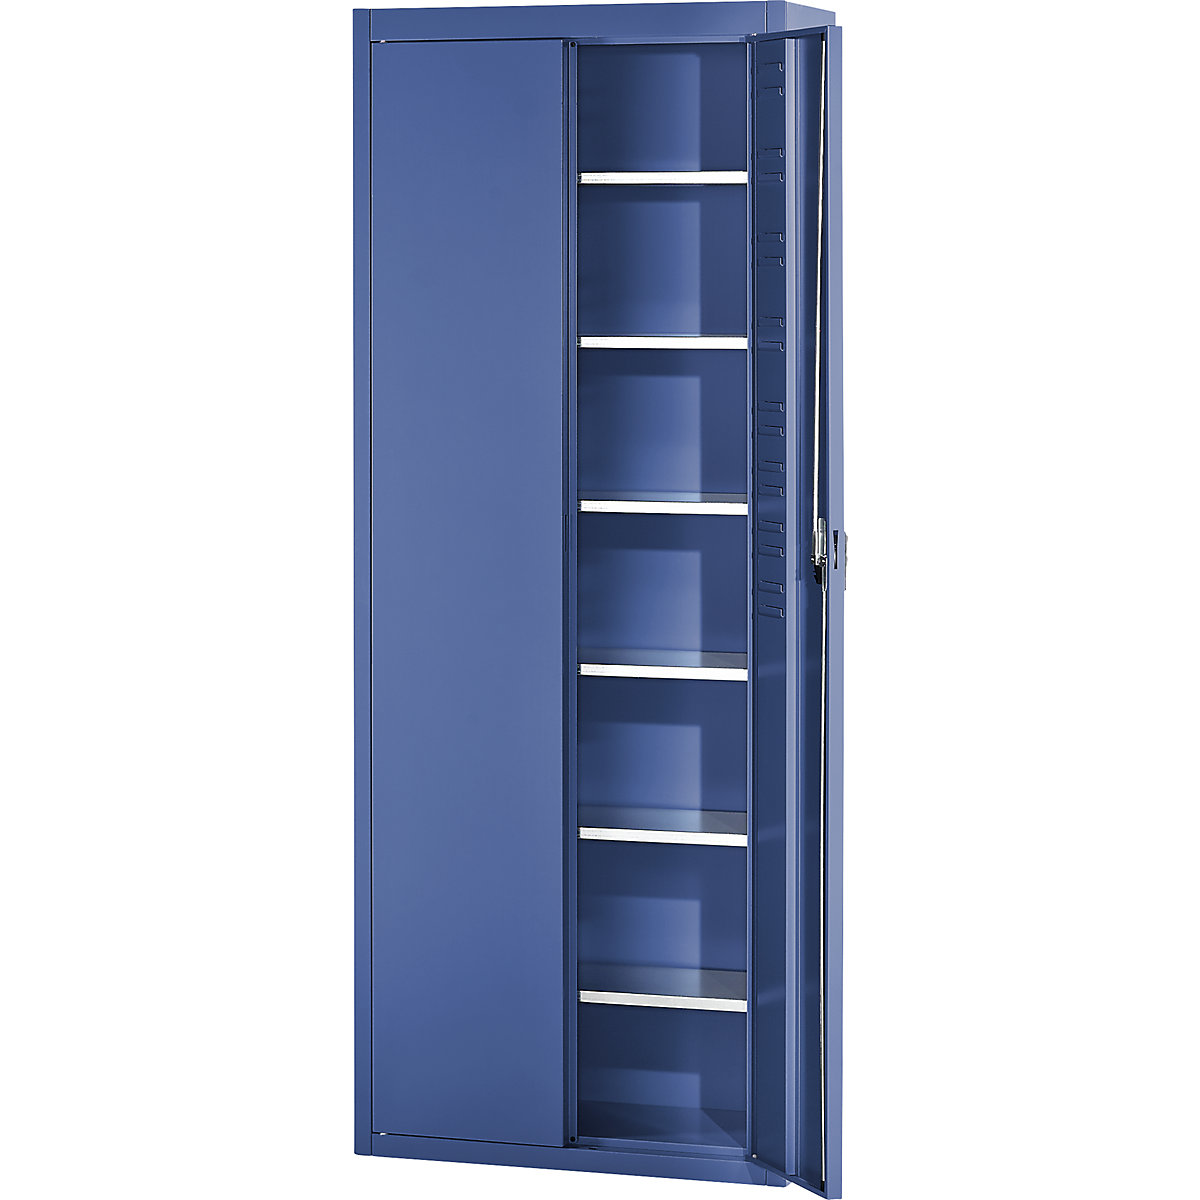 Storage cupboard, without open fronted storage bins – mauser, HxWxD 2150 x 680 x 280 mm, single colour, blue-1